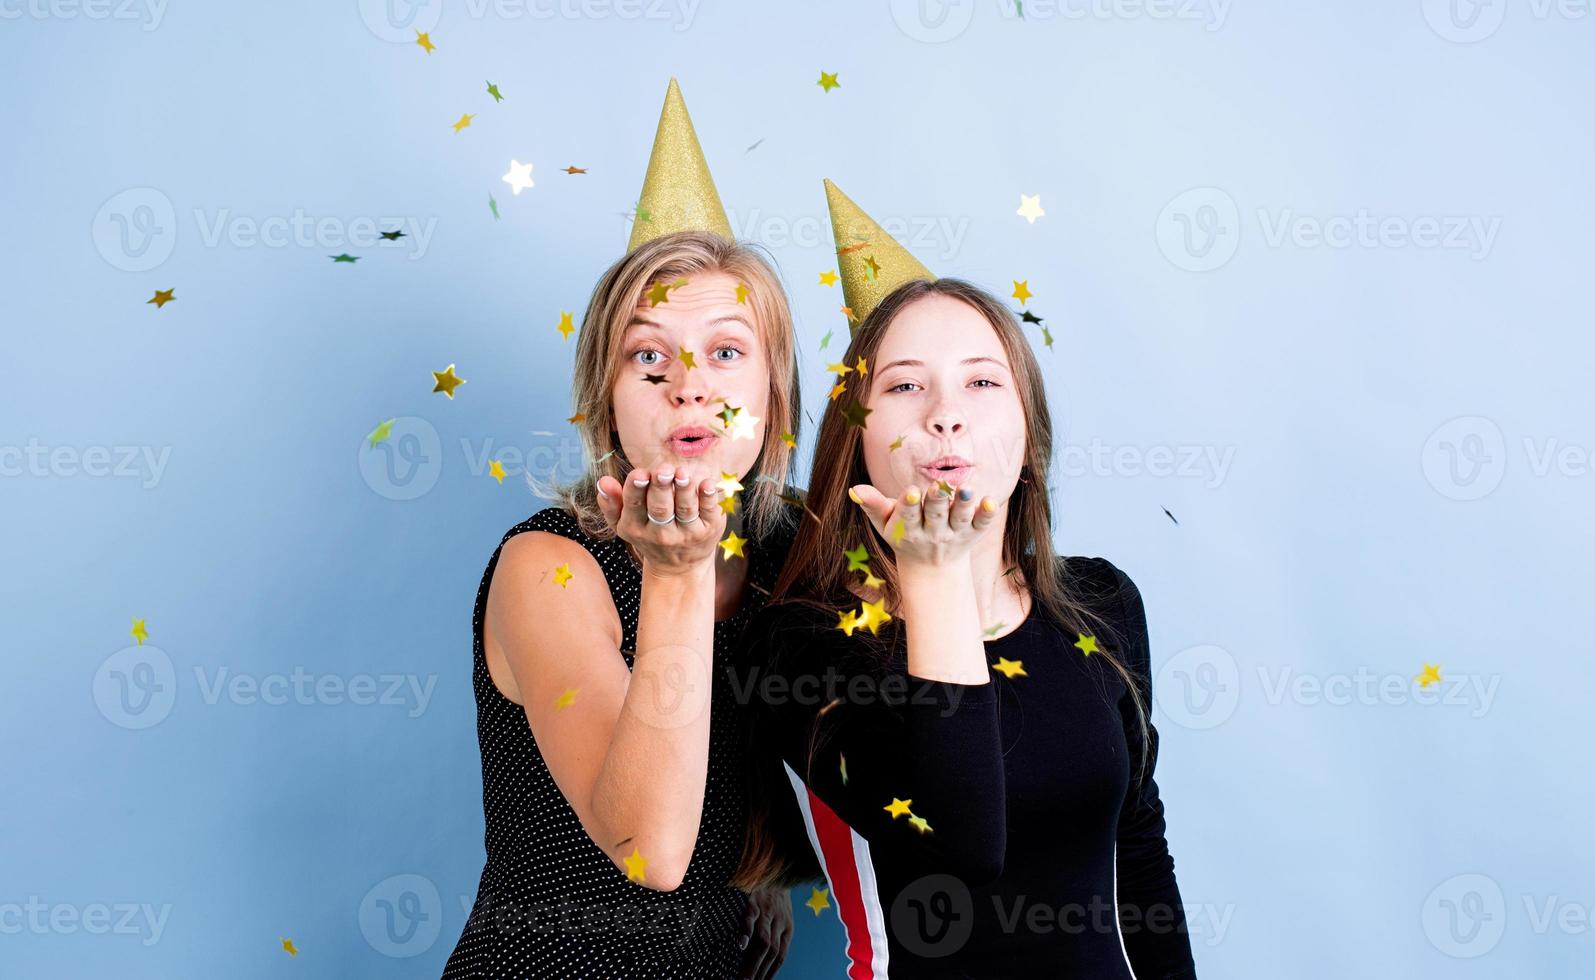 Young women holding balloons celebrating birthday over blue background photo